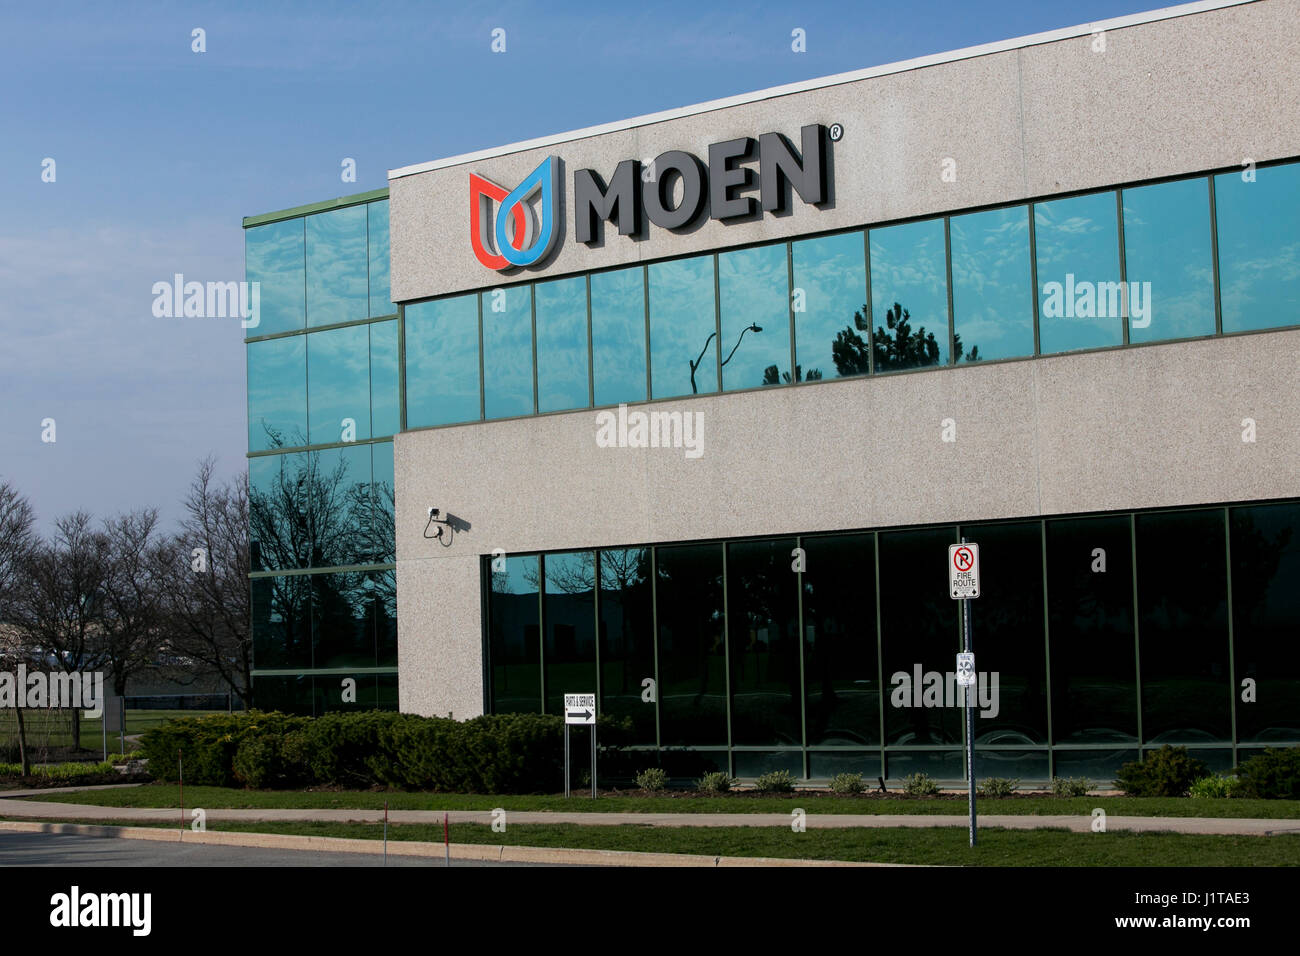 A logo sign outside of a facility occupied by Moen, Inc., in Oakville, Ontario, Canada, on April 15, 2017. Stock Photo